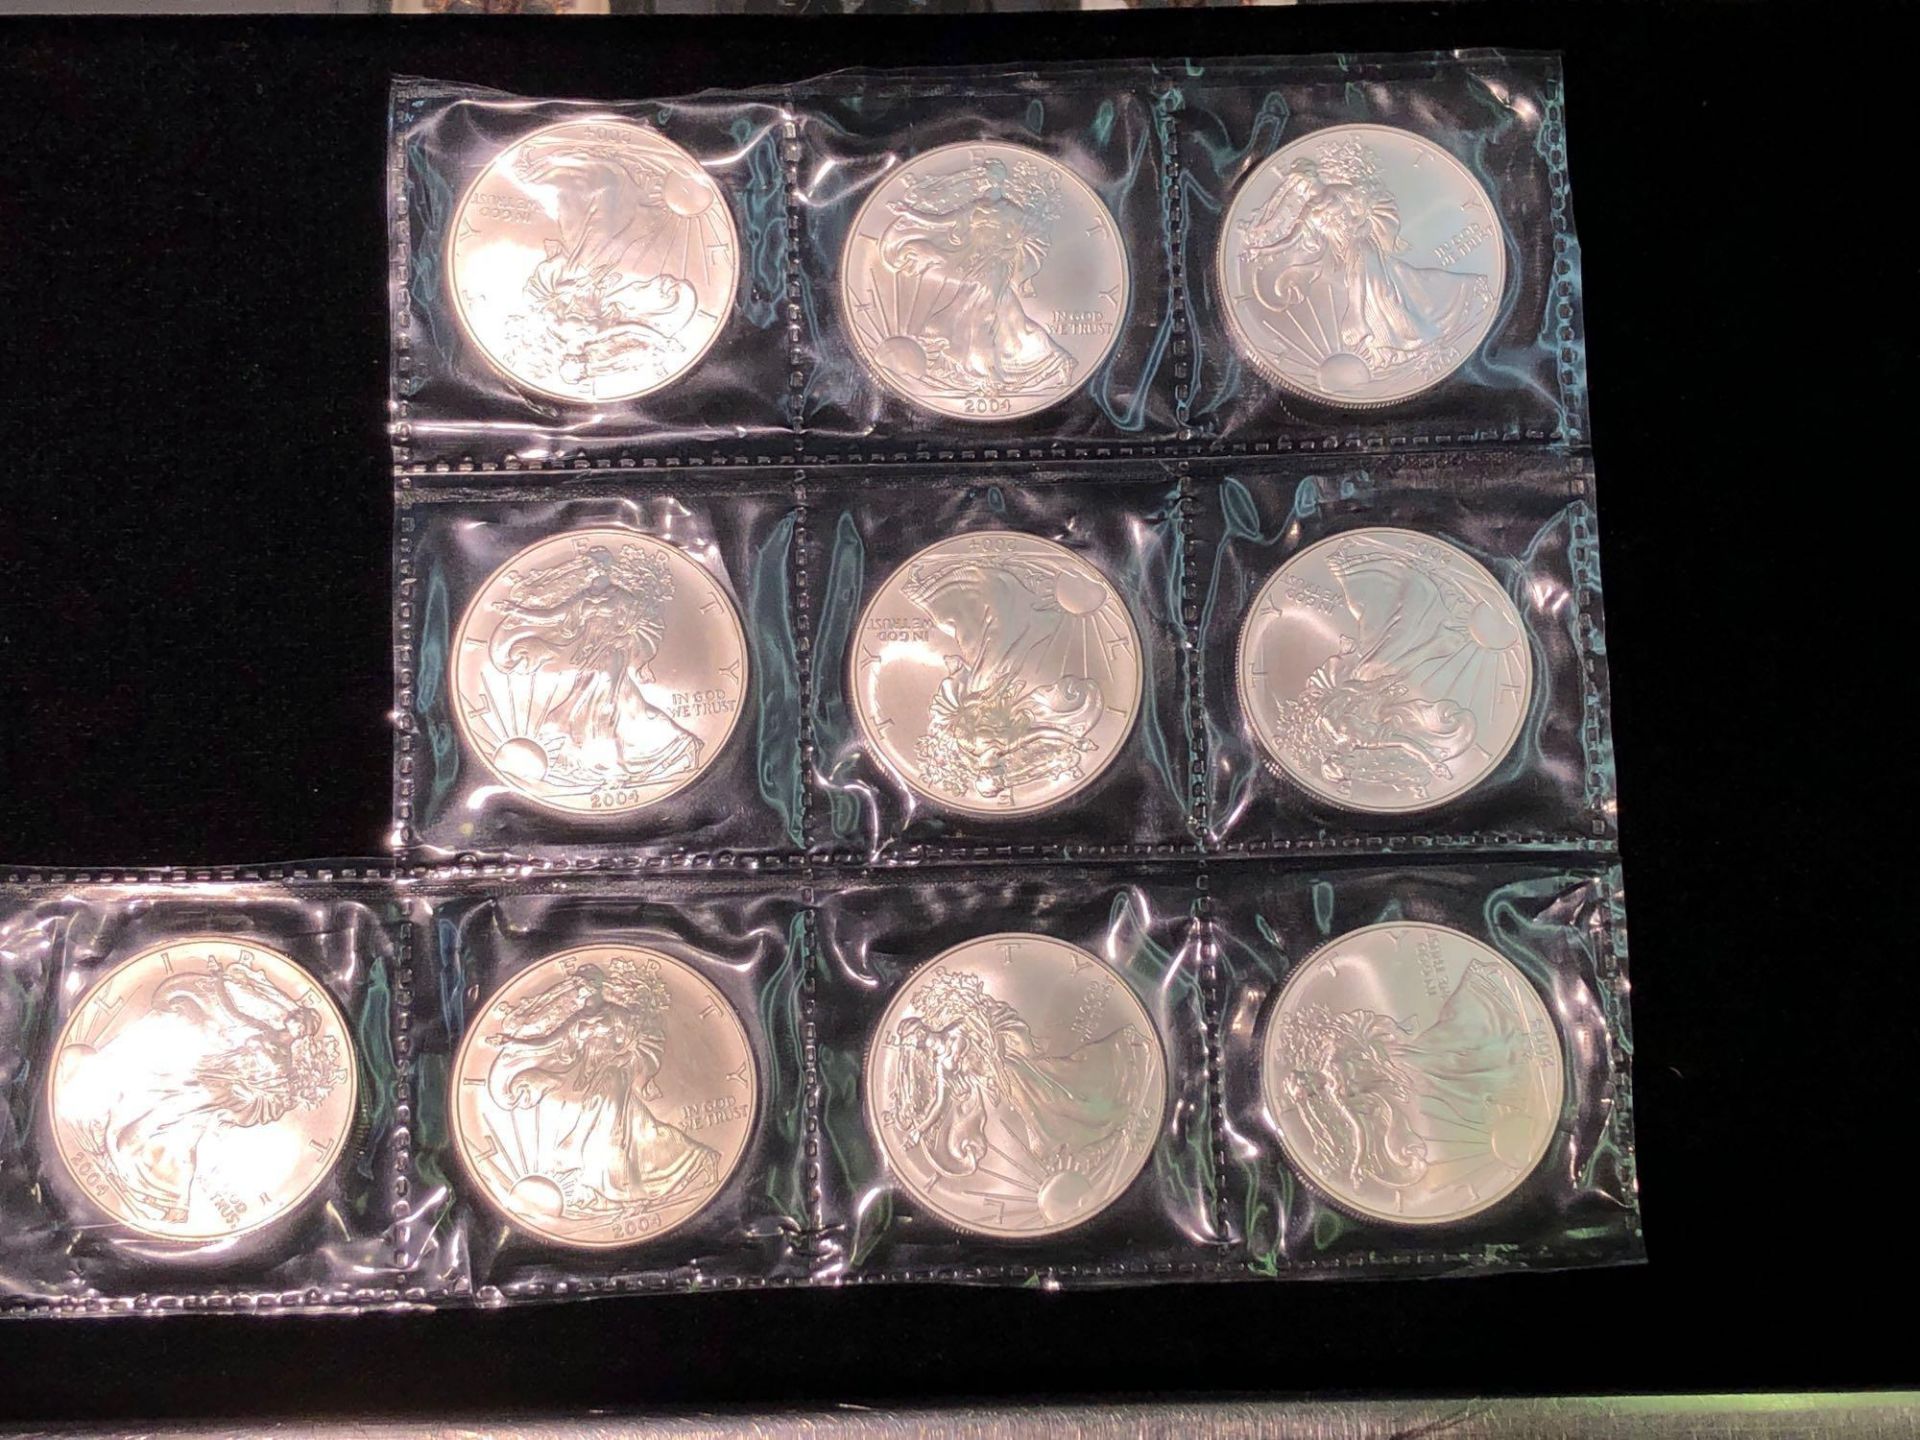 LOT OF 9 2004 AMERICAN EAGLE 1 OZT SILVER COINS SEALED IN PLASTIC